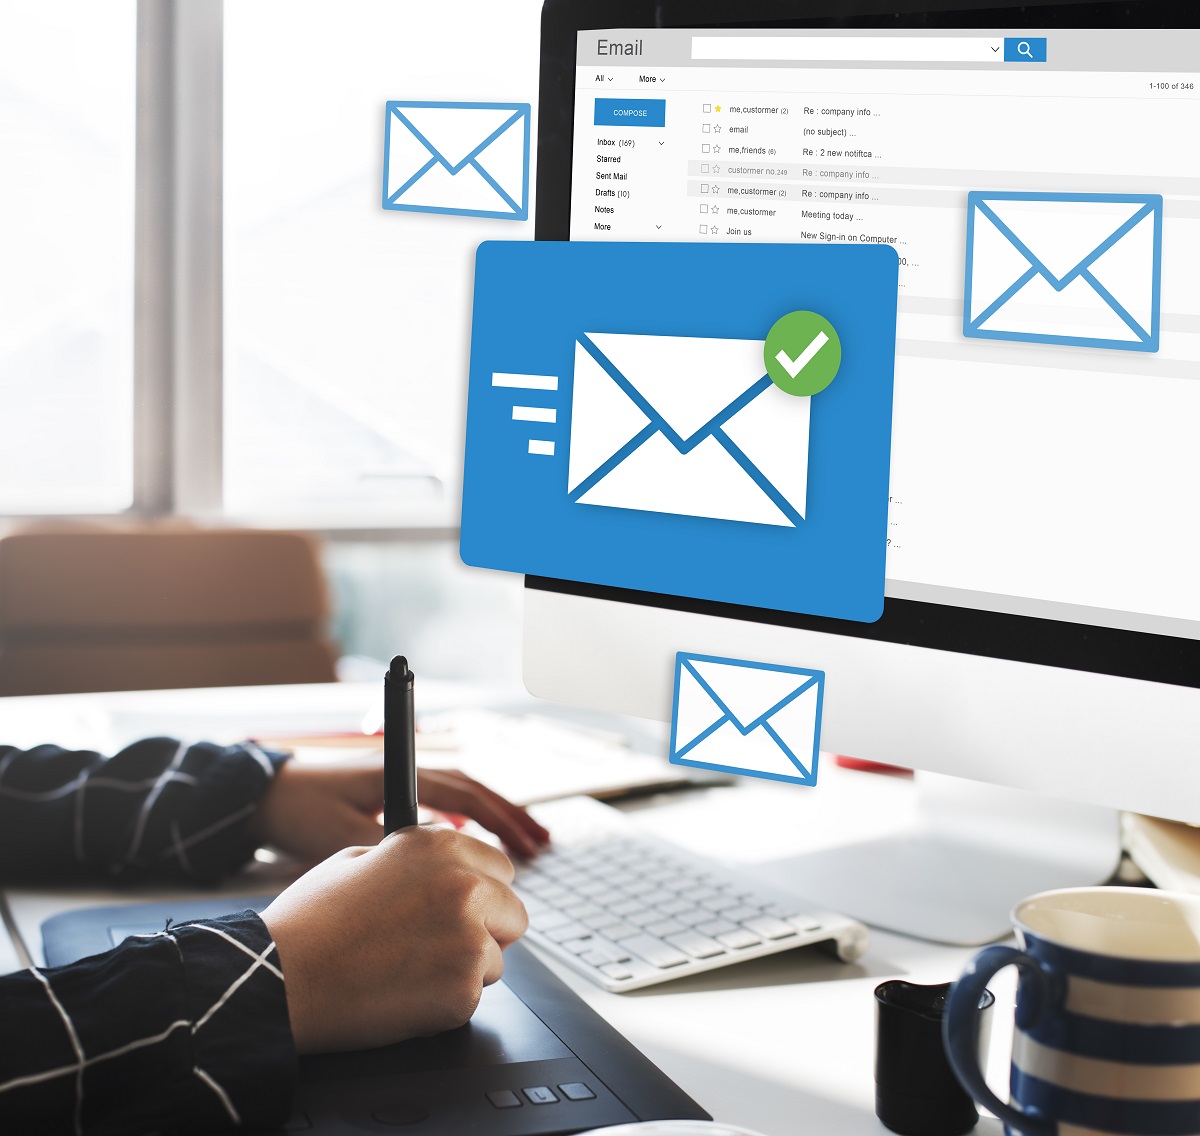 How to Build a High-Performing Email Marketing Campaign in 6 Easy Steps